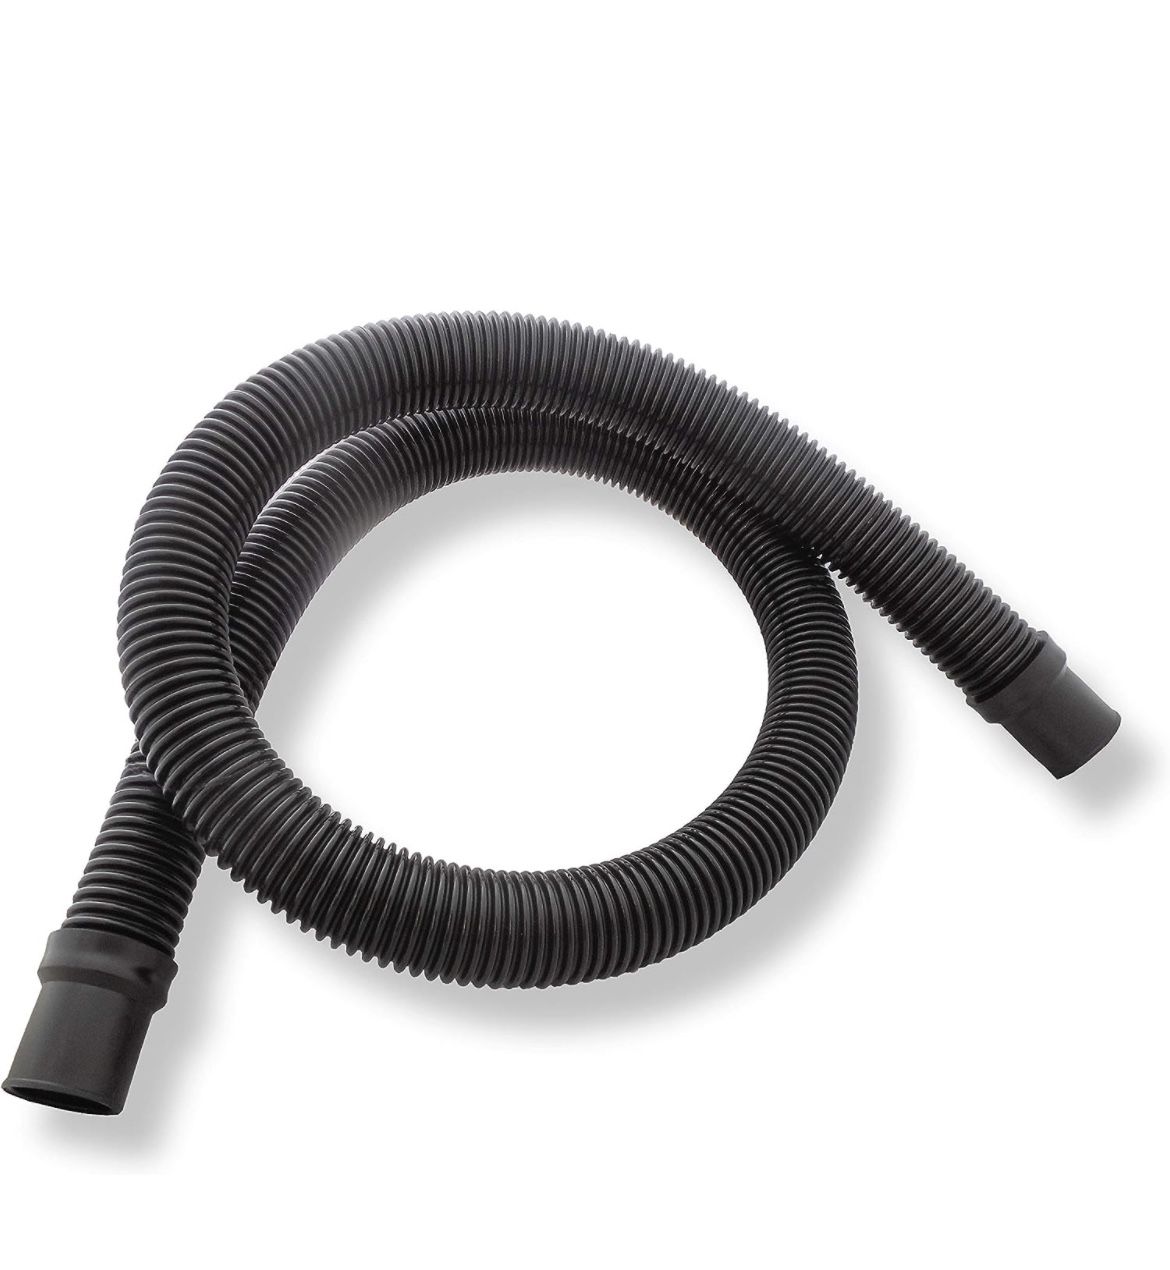 JED Pool Tools 60-345-06 Deluxe Filter Connecting Hose for Swimming Pool, 1-1/2-Inch by 6-Feet